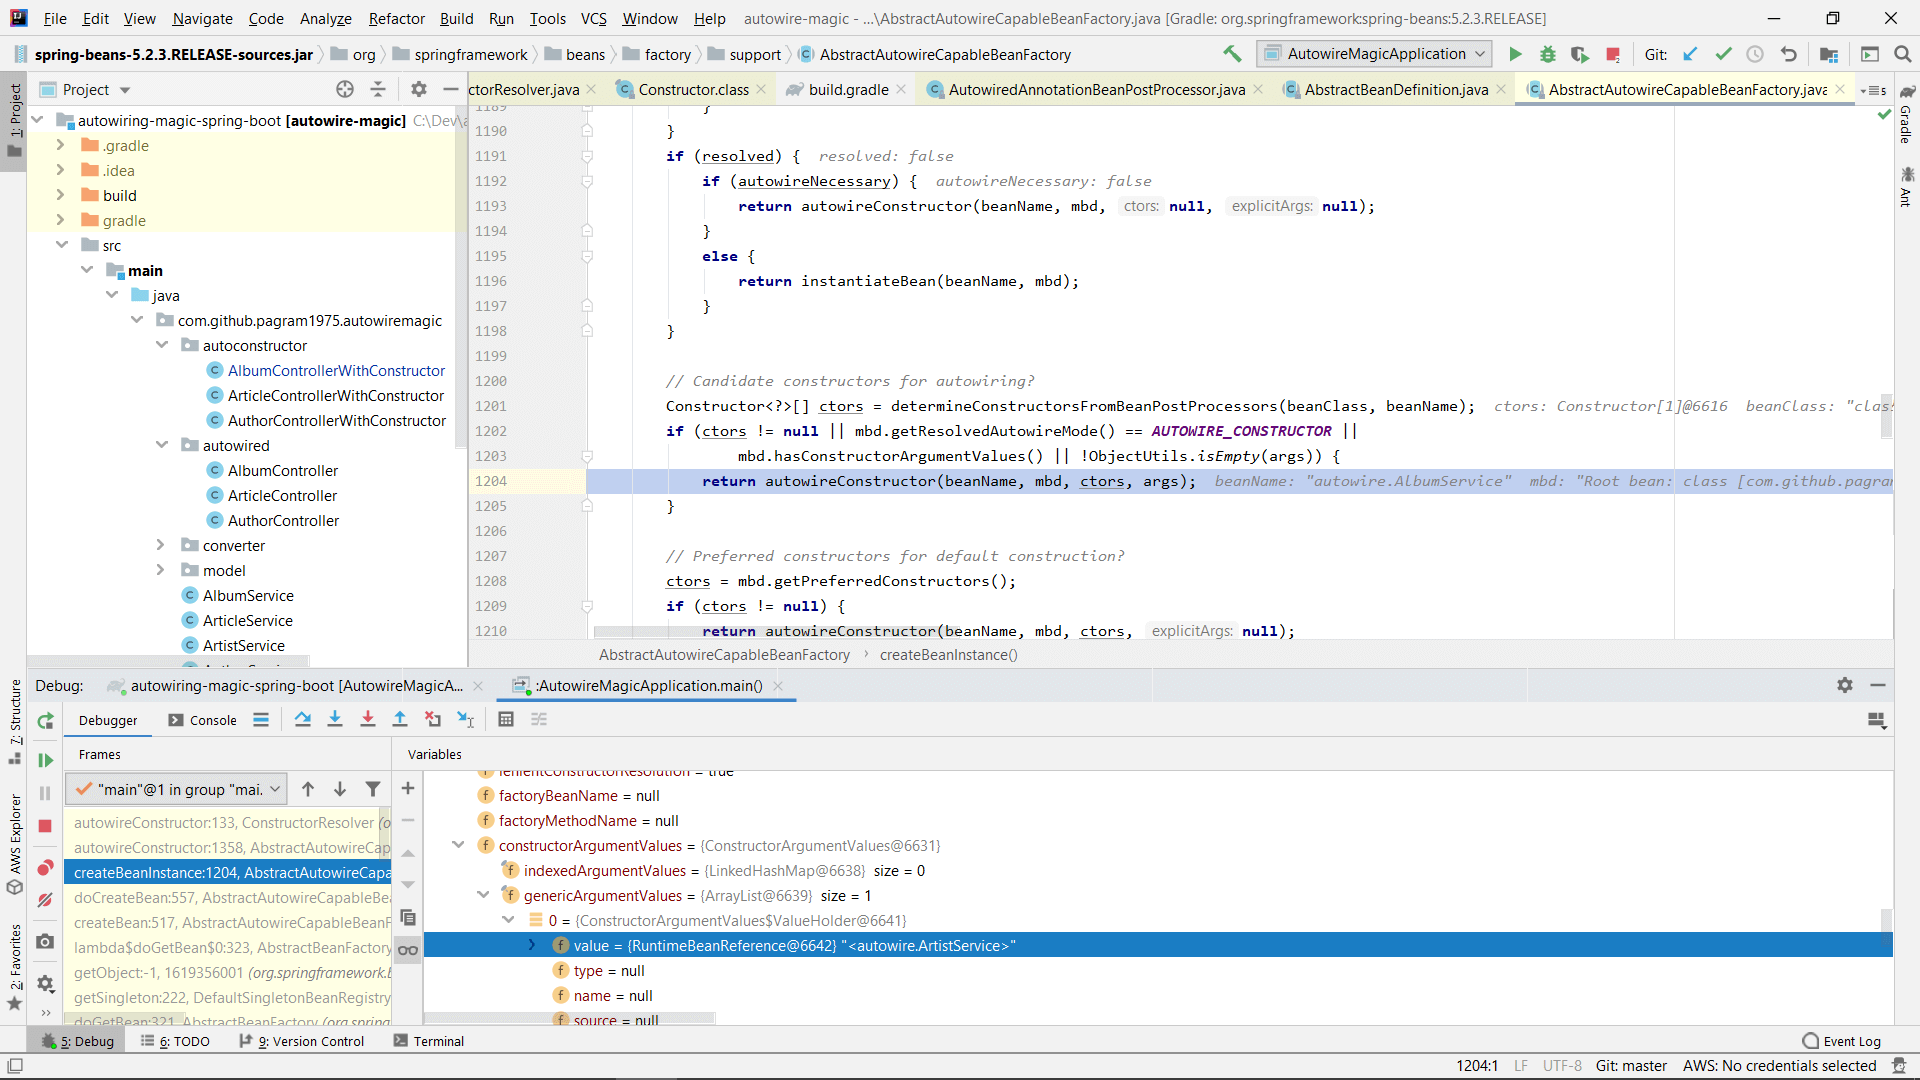 Debugging Spring in IntelliJ Idea to see the configuration data held in the RootBeanDefinition